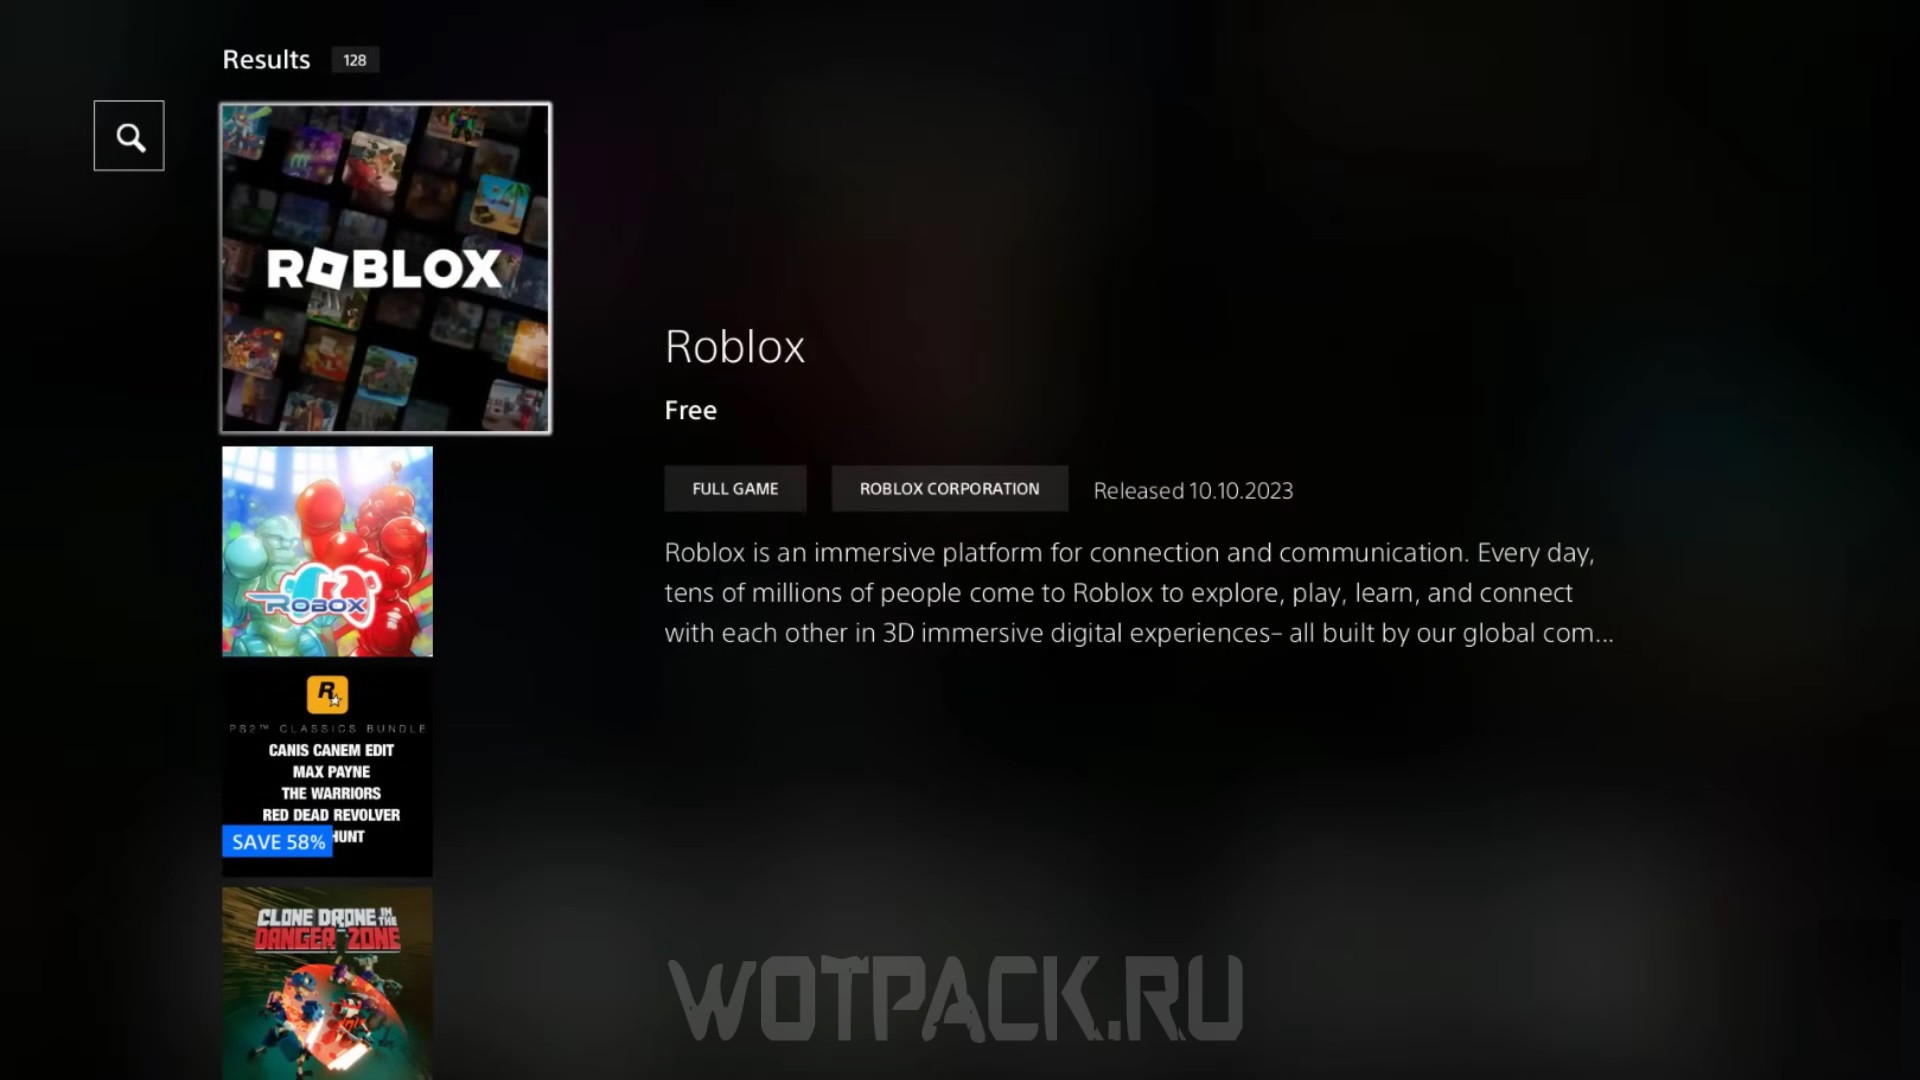 How to play Roblox on PlayStation 4 and PlayStation 5?